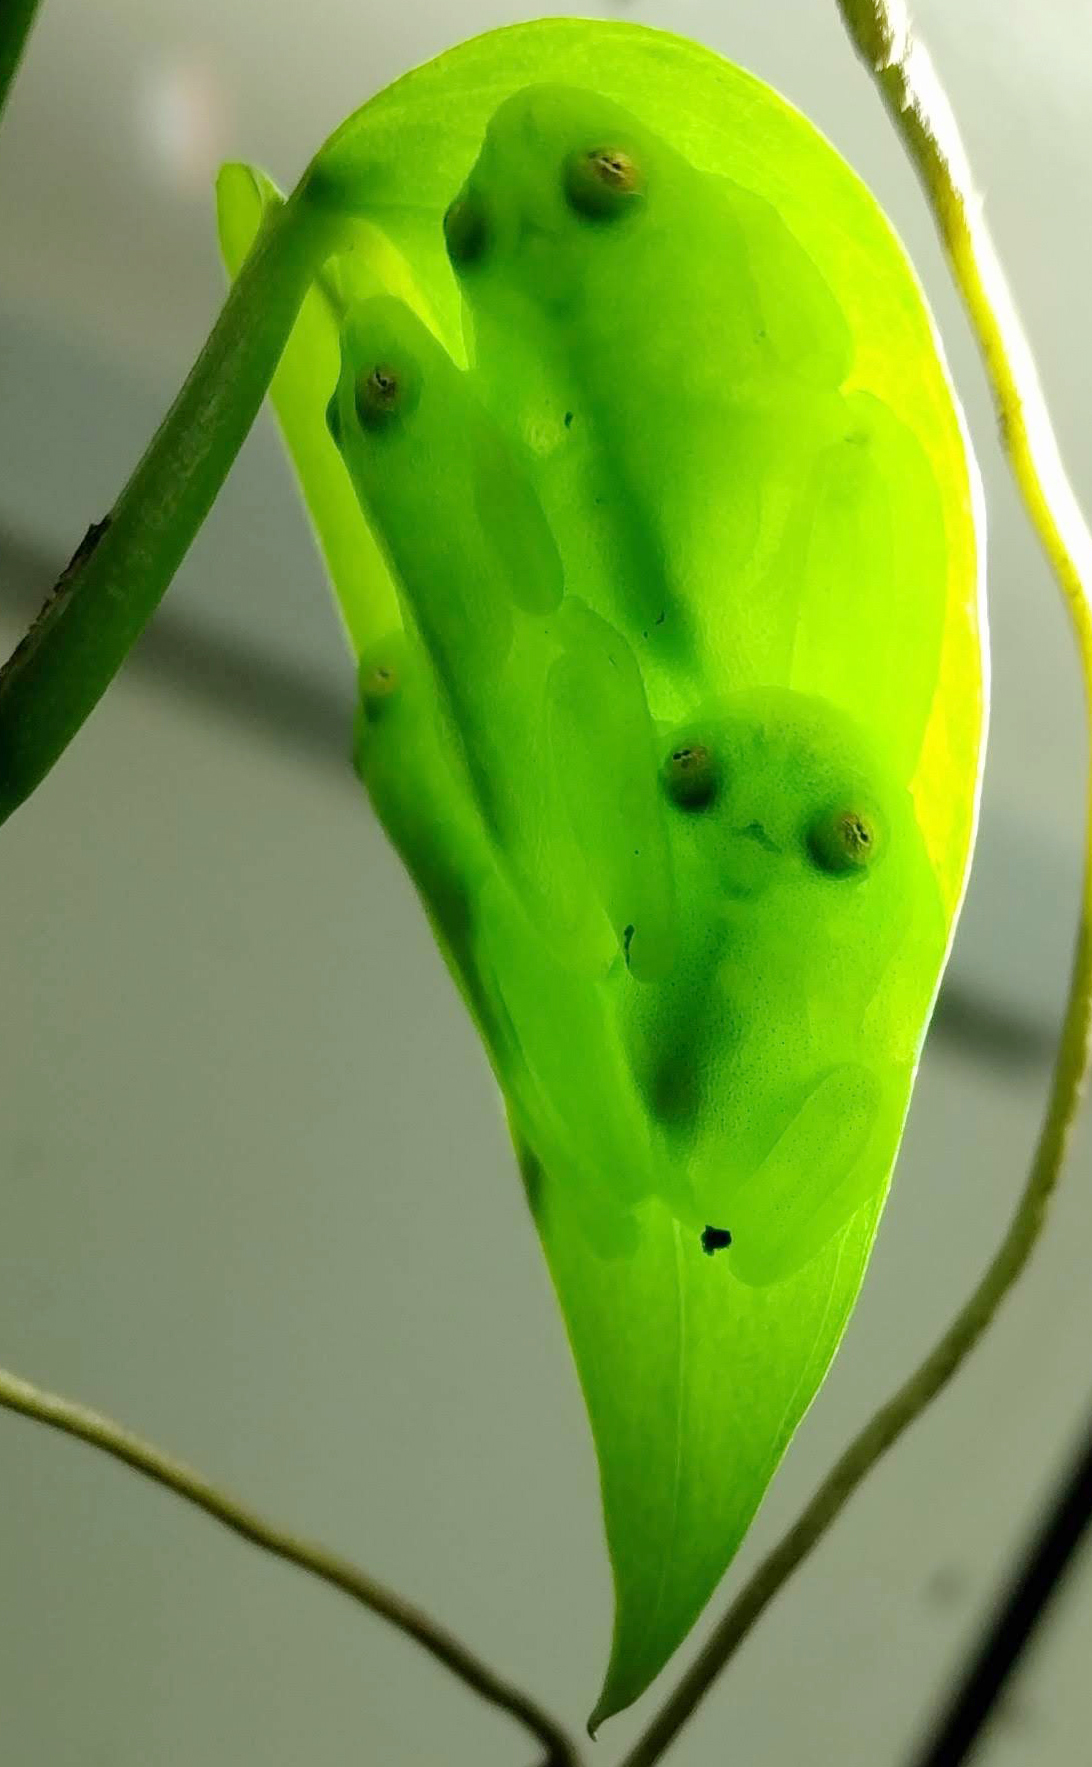 A group of glassfrogs sleeping together upside down on a leaf, showing their leaf camouflage in transmitted (downwelling) light. By Jesse Delia